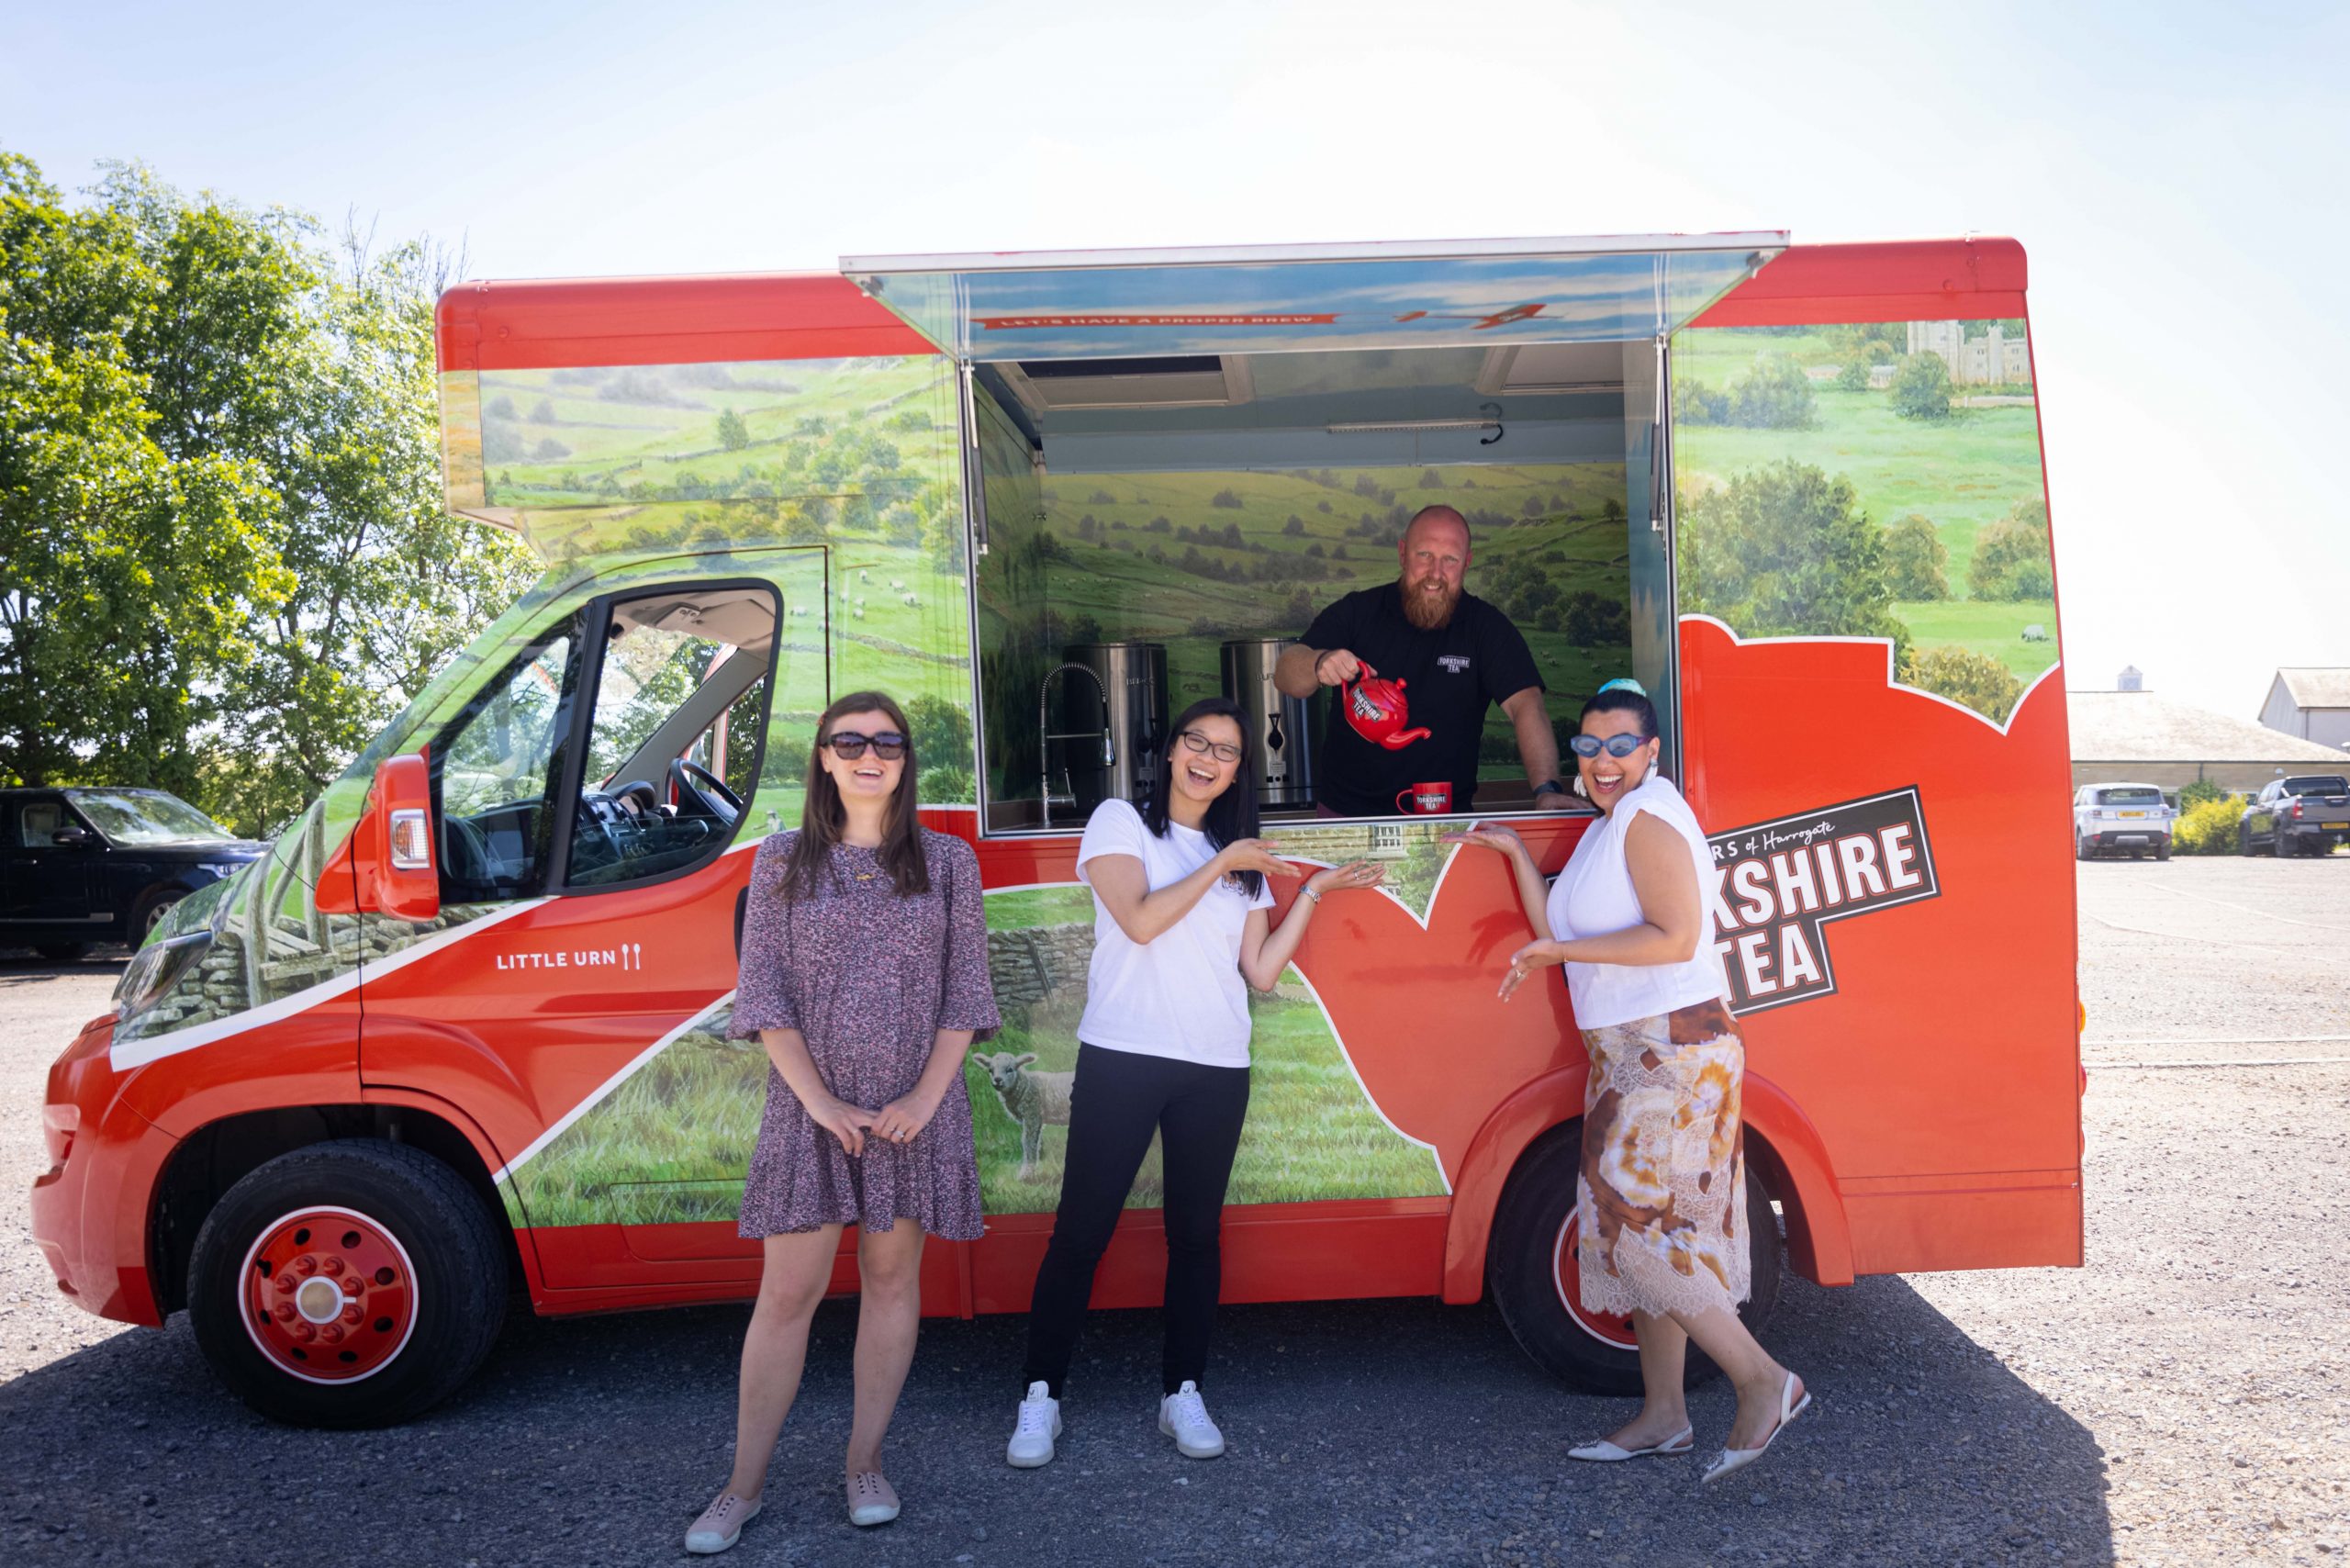 Yorkshire Tea Tours UK to celebrate convenience sector